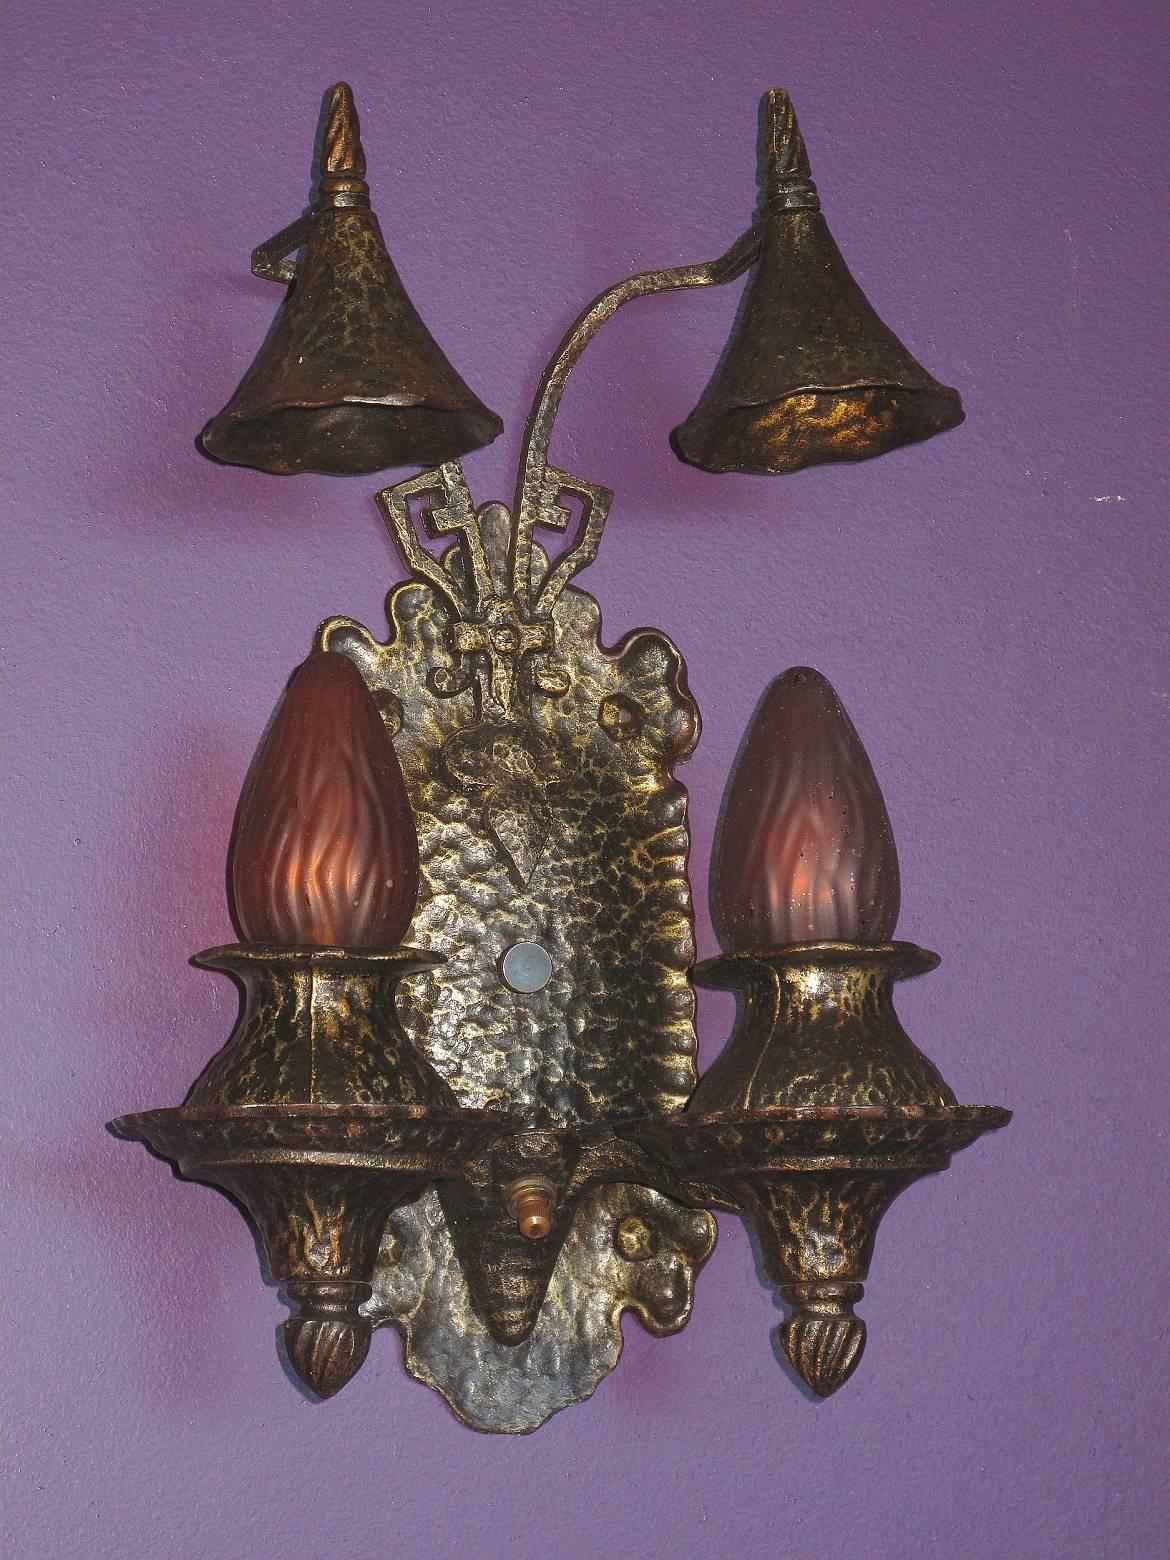 Wonderfully preserved 1920s cast iron wall sconces in a style which would look terrific in any of the Revival styles popular in the 20s including Tudor revival, Spanish Revival, Gothic revival and the Craftsman style. Original finish and patina has